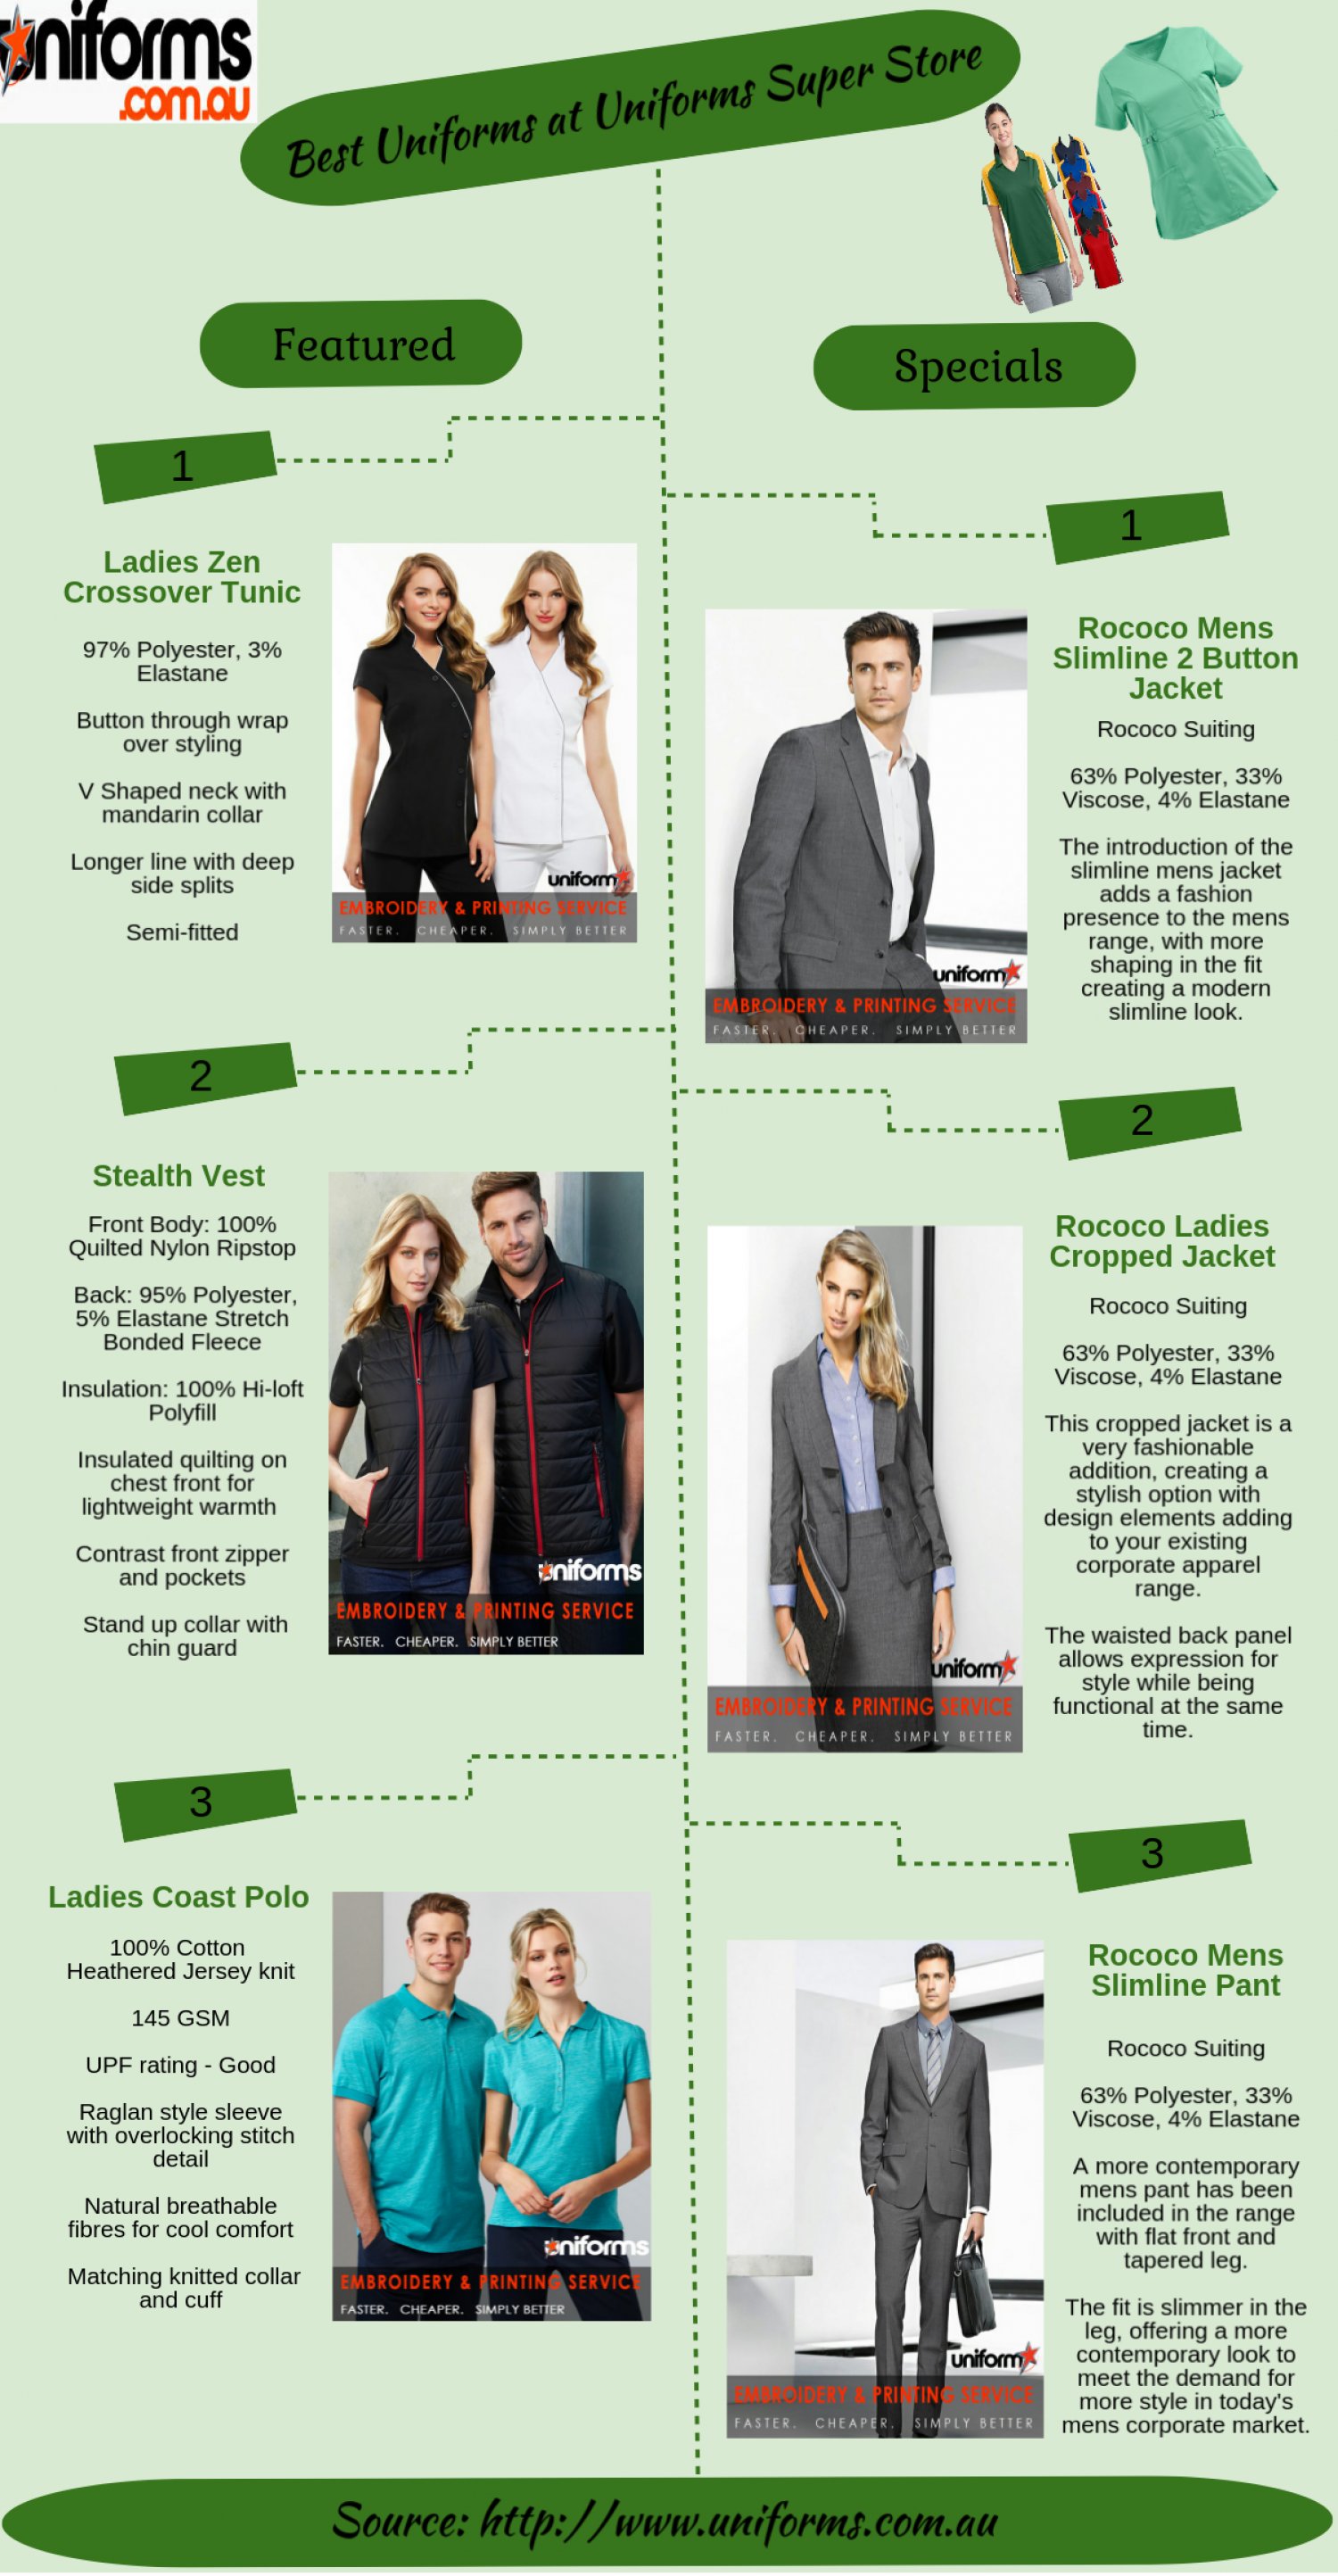 Check Out Best Uniforms at Uniforms Super Store Infographic